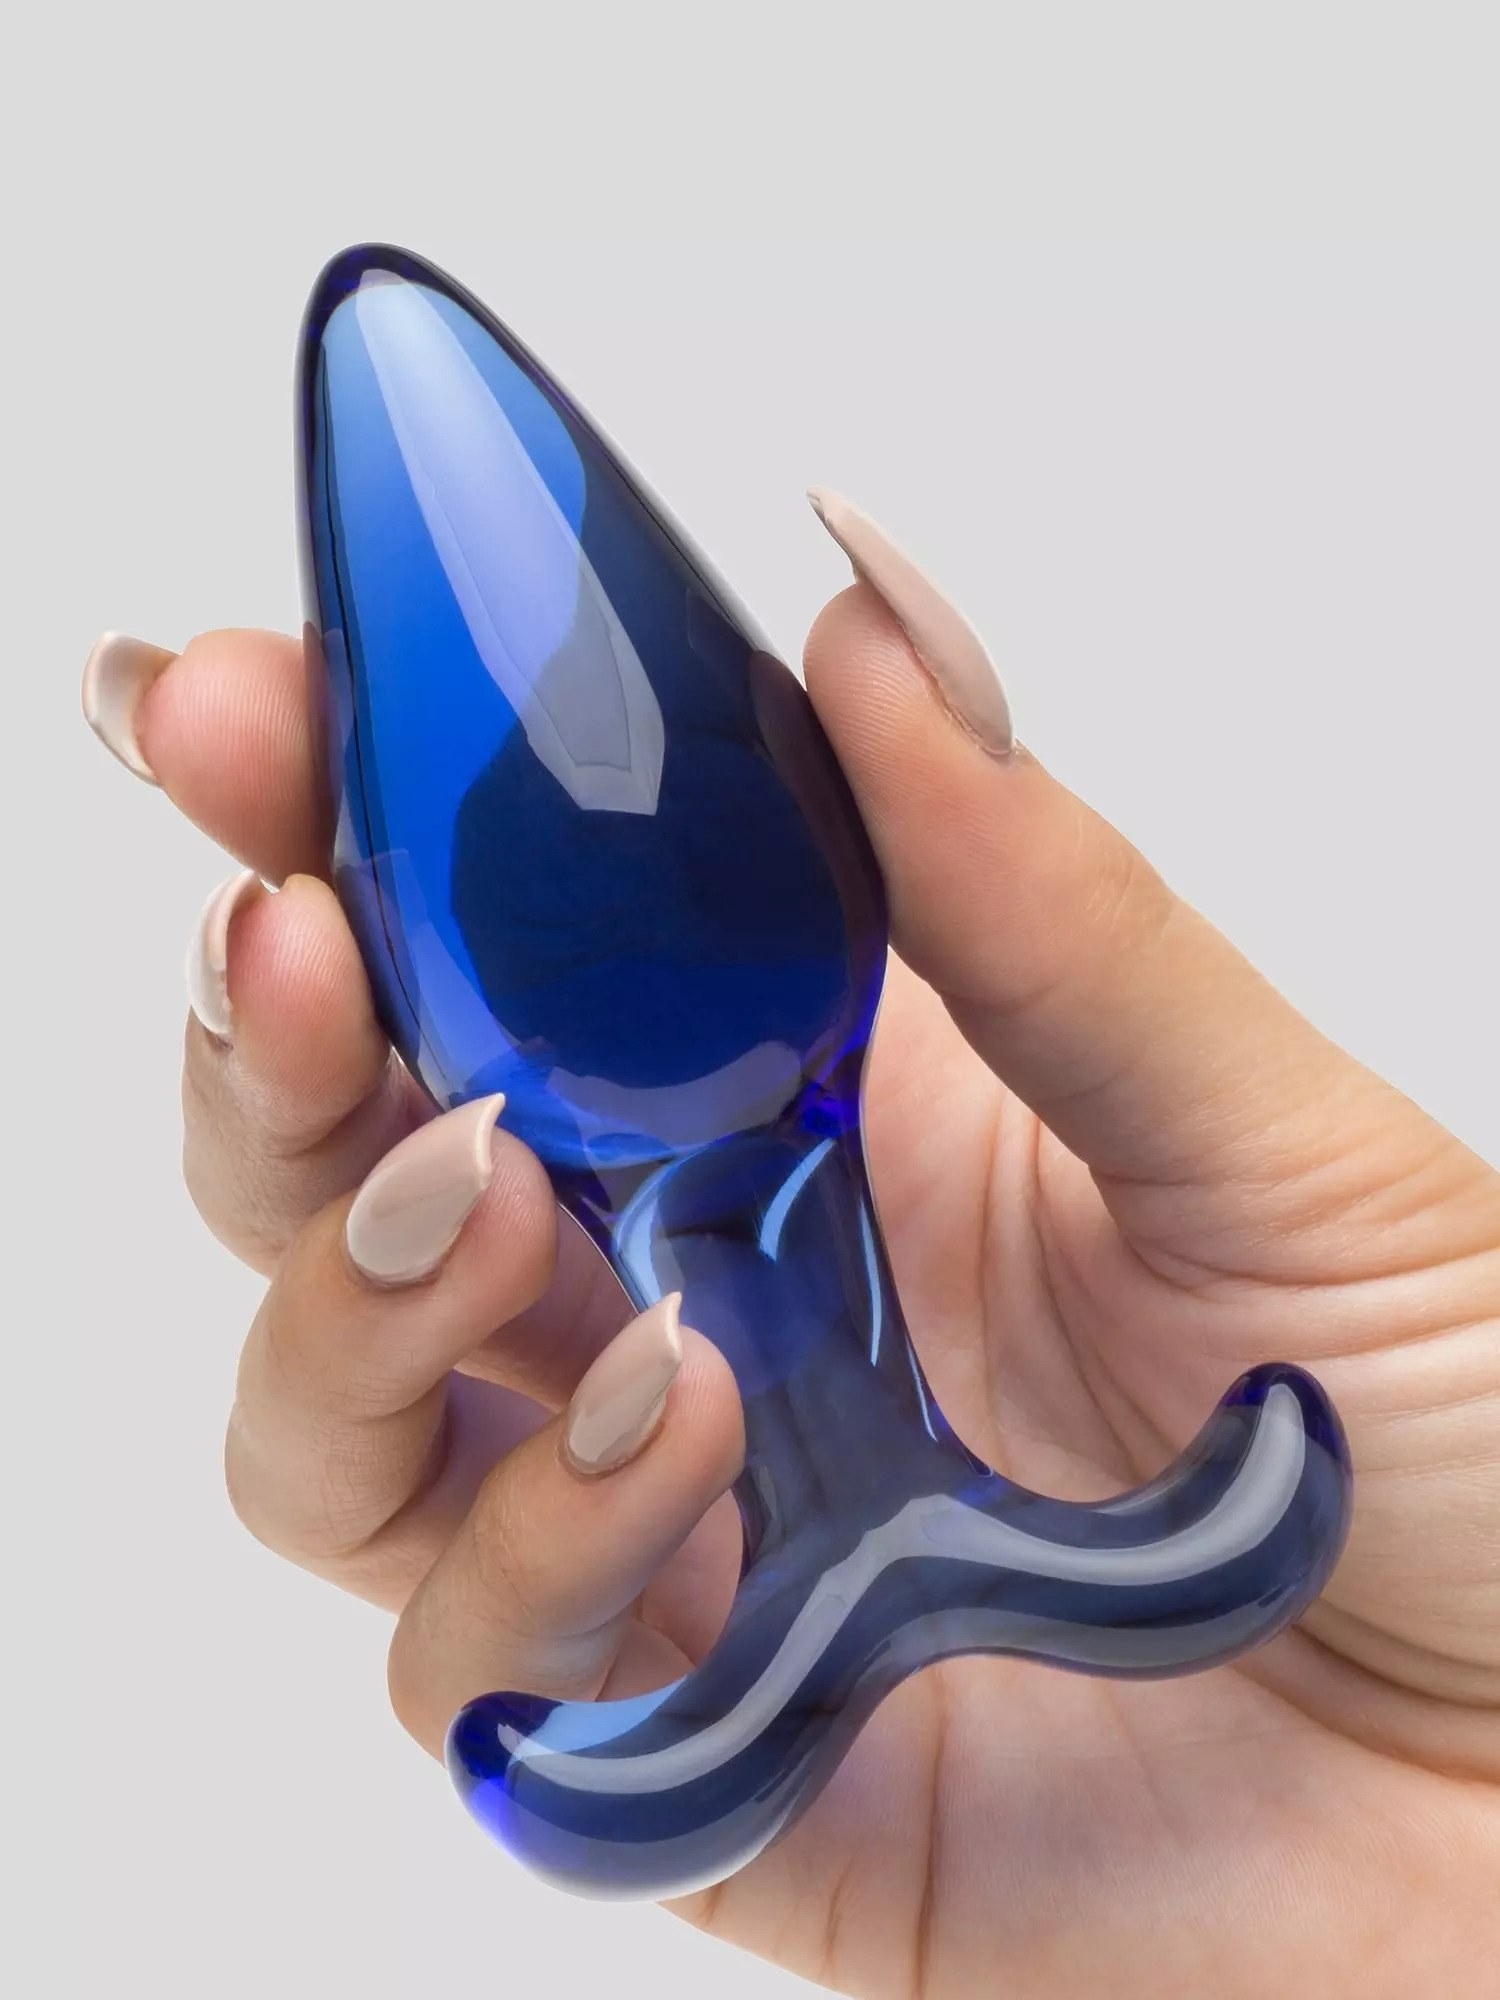 Model holding blue glass butt plug with curved flared base